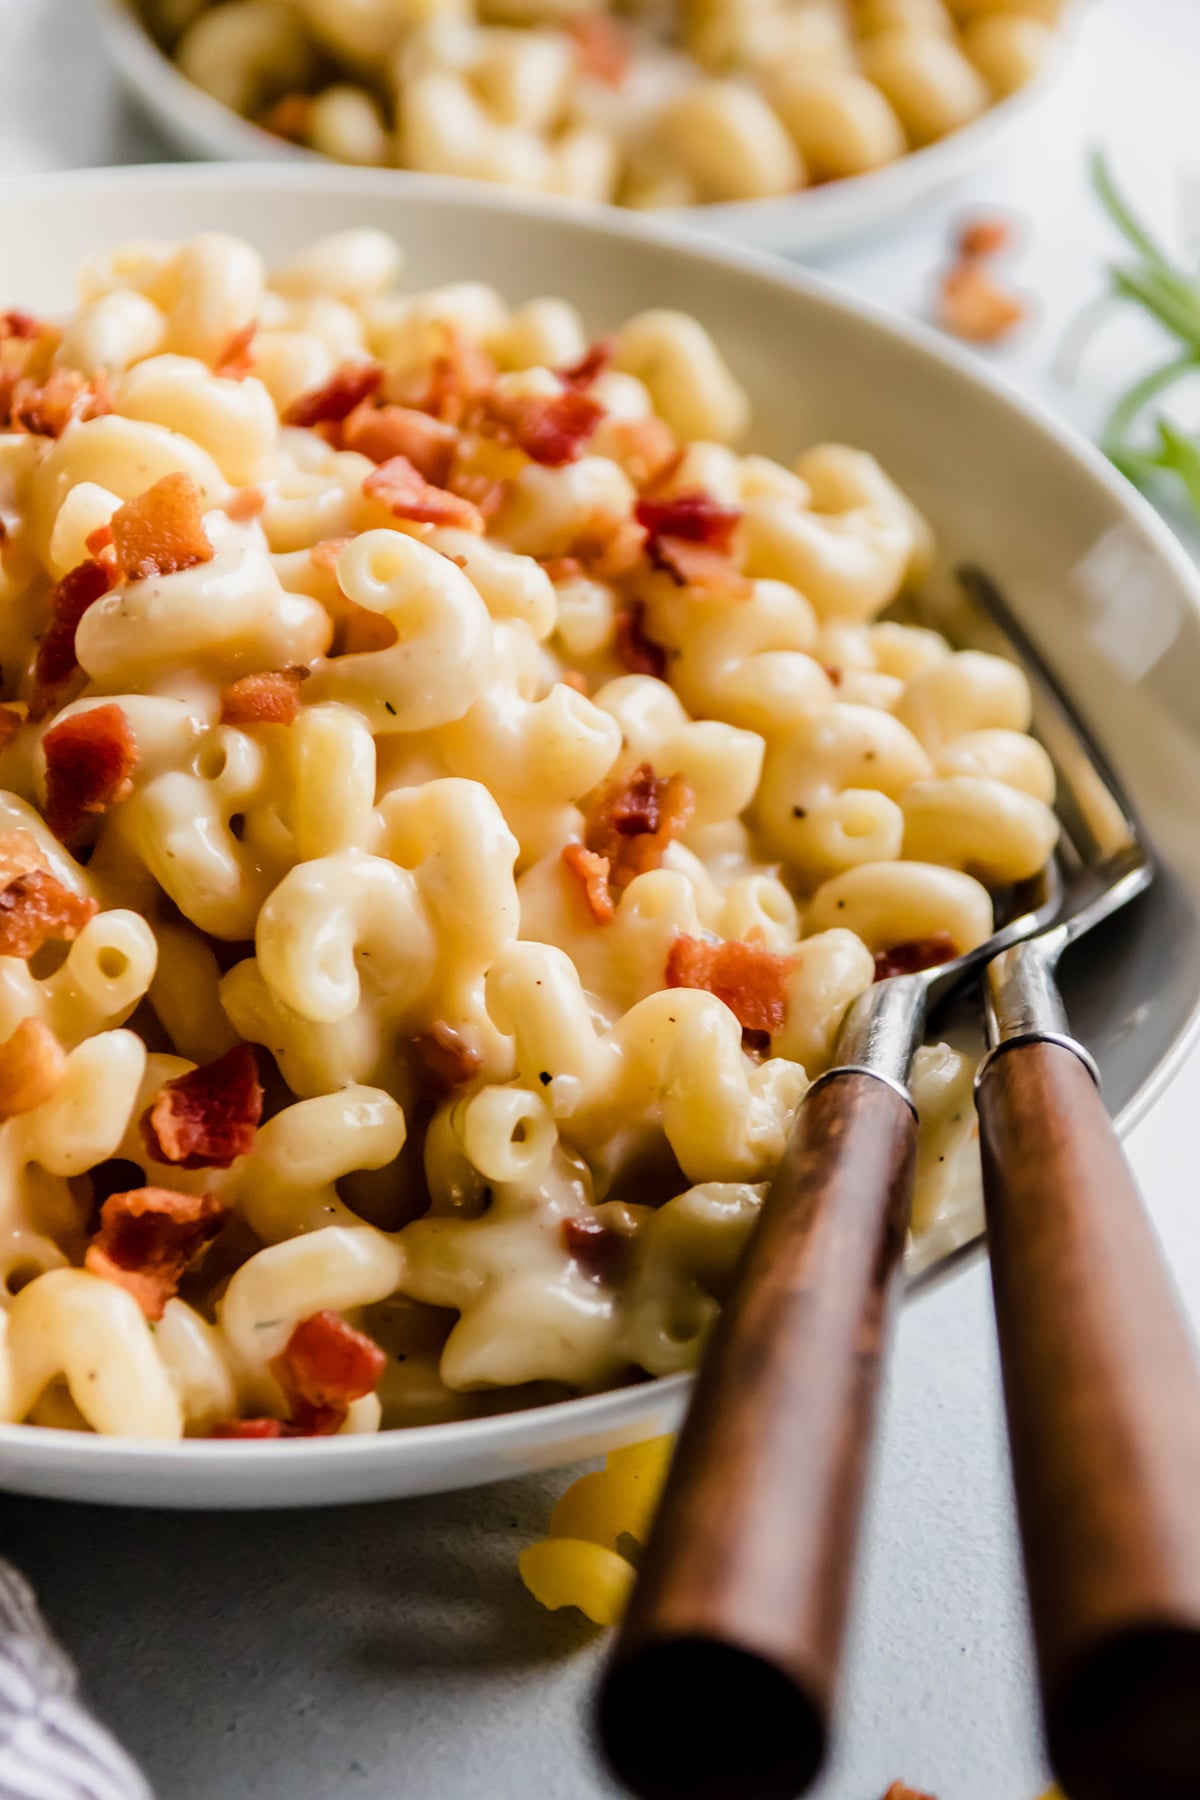 Two wooden forks in a large white bowl filled with macaroni and cheese and topped with crumbled bacon.